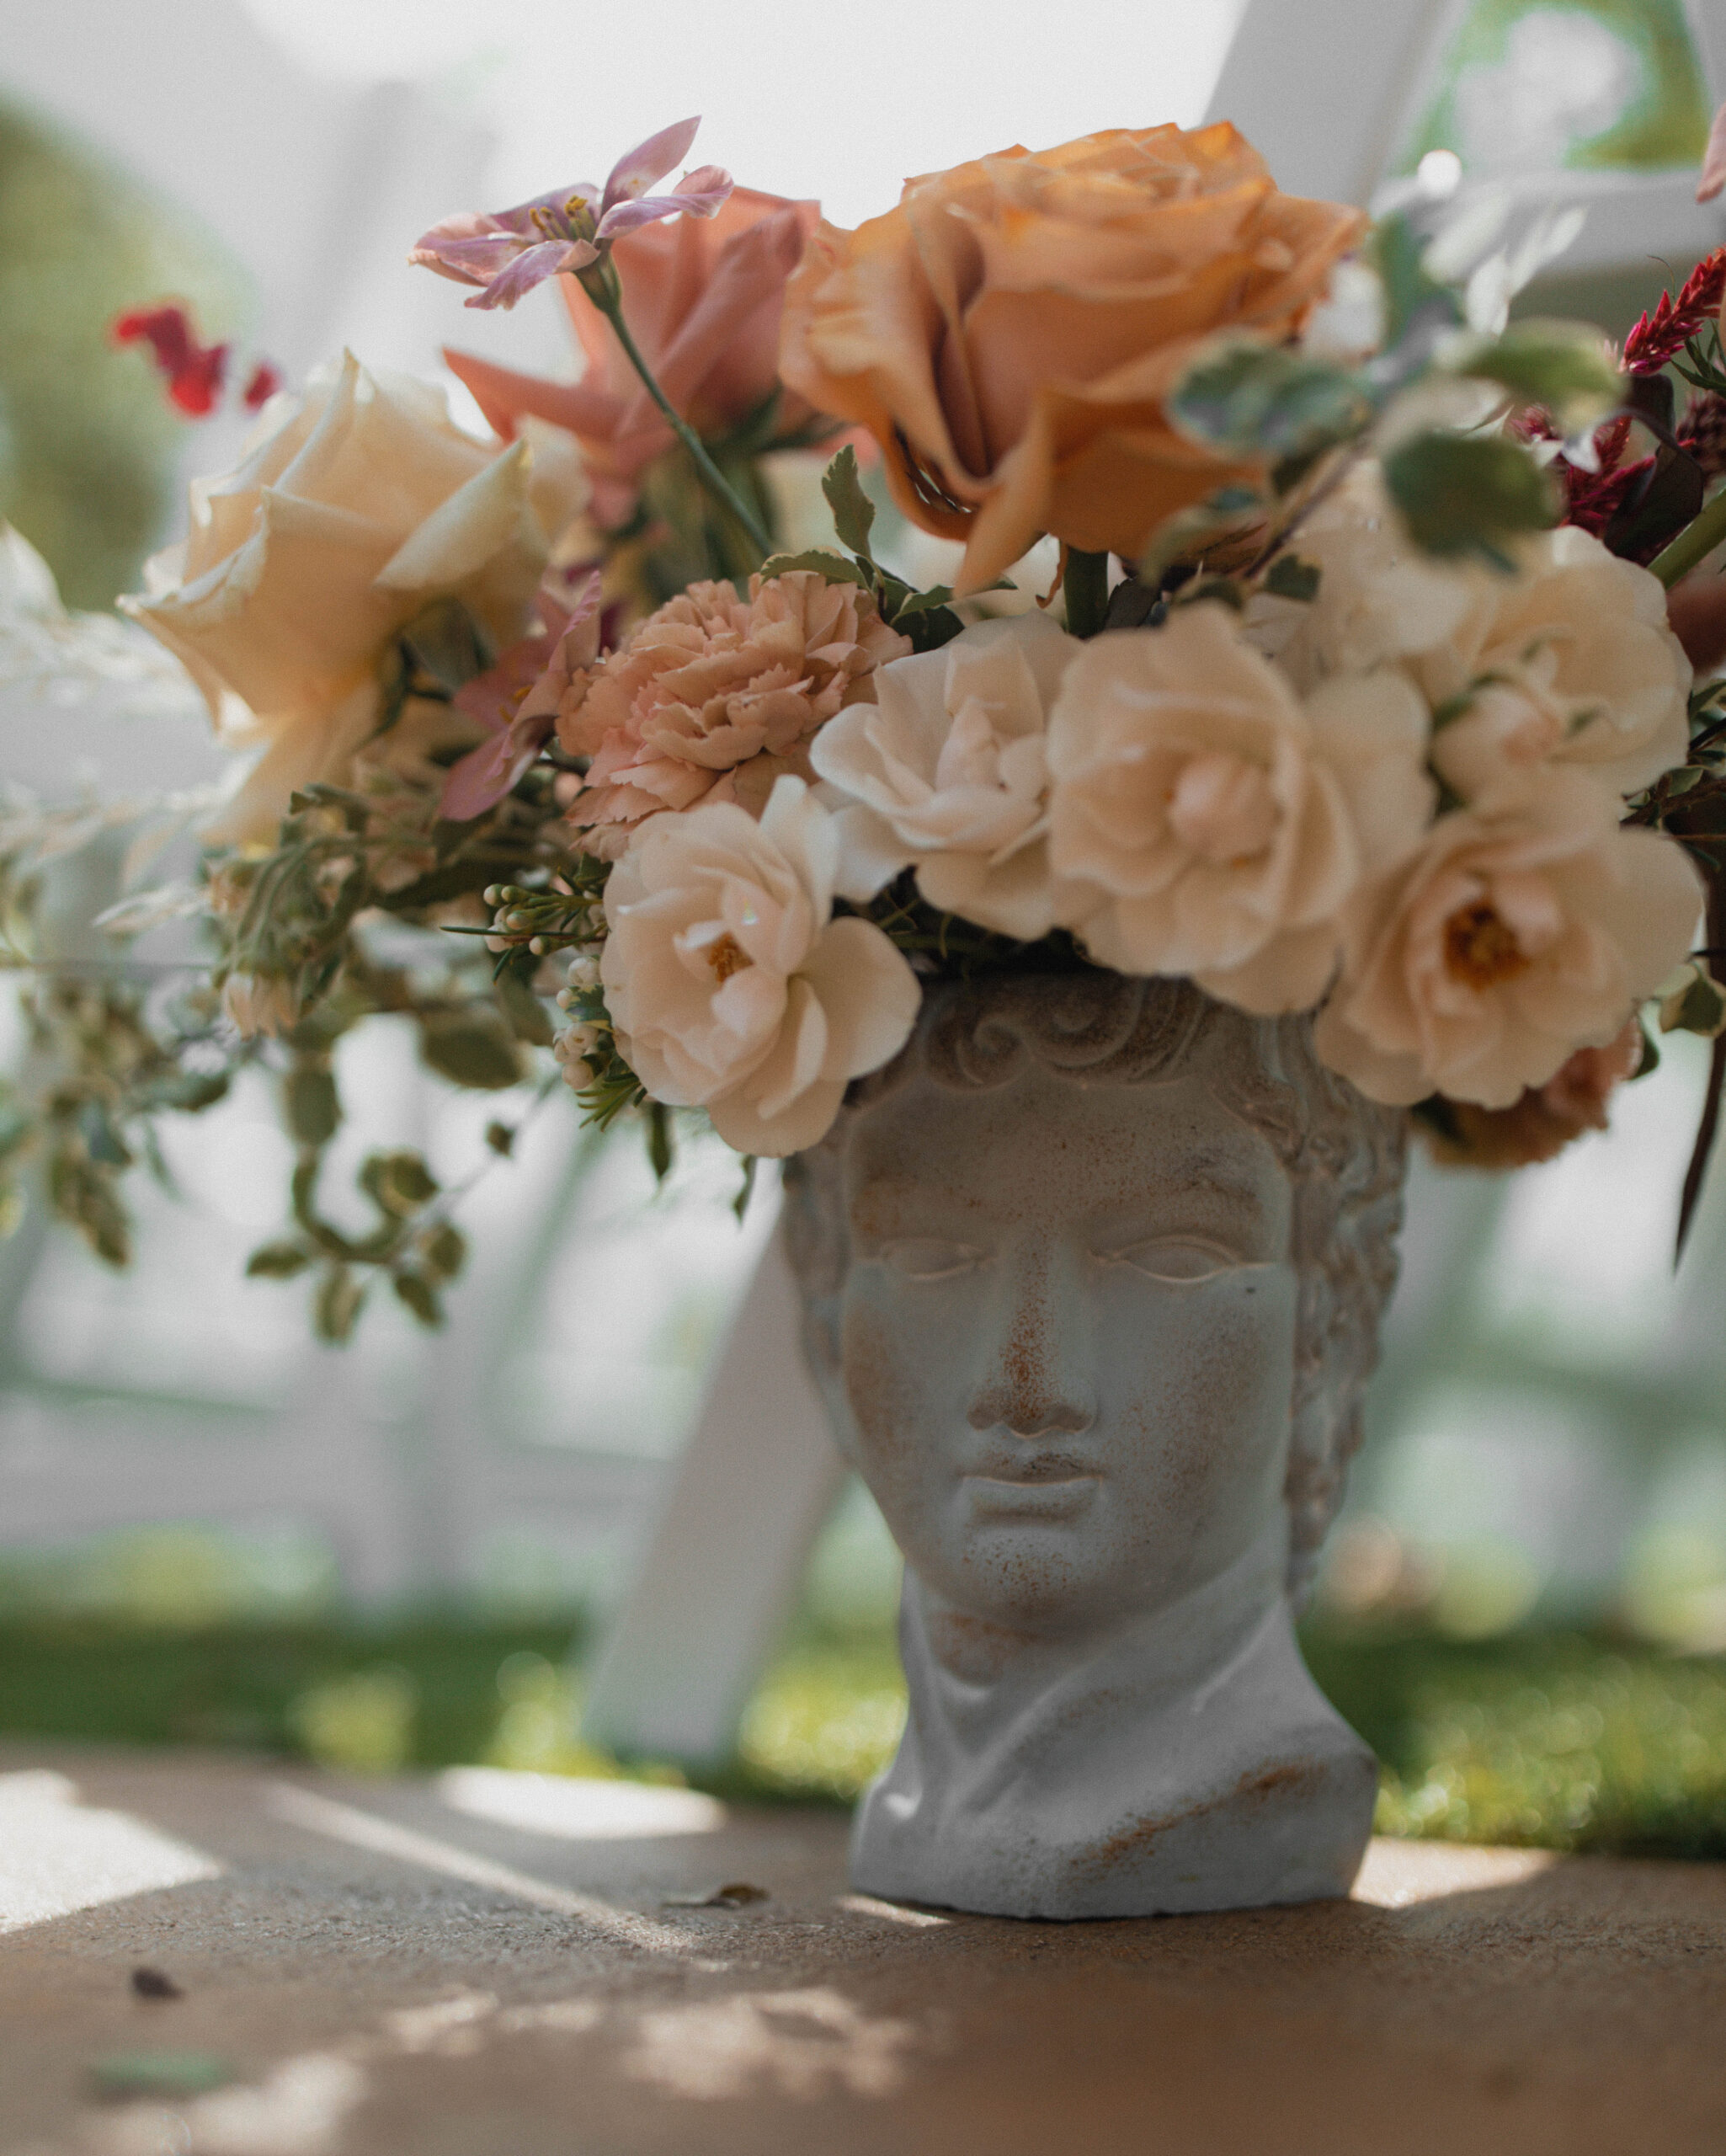 Close-up of sculpture vases adorned with elegant fall florals, adding sophistication to the wedding decor at Casa Blanca on Brushy Creek.